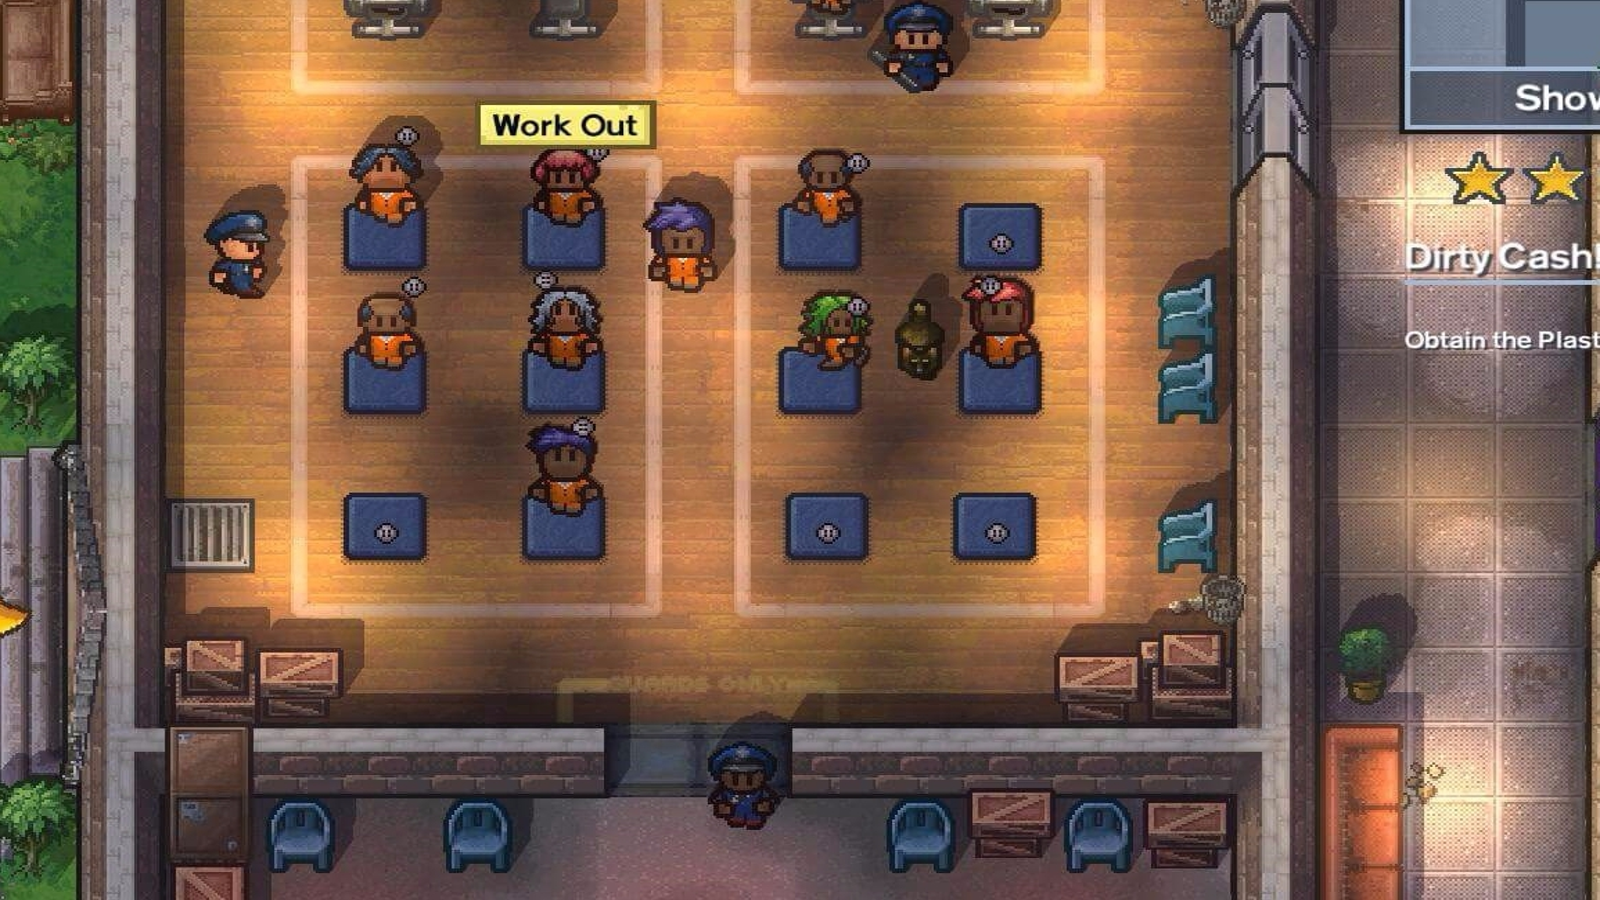 Popular prison escape game The Escapists comes to the Play Store